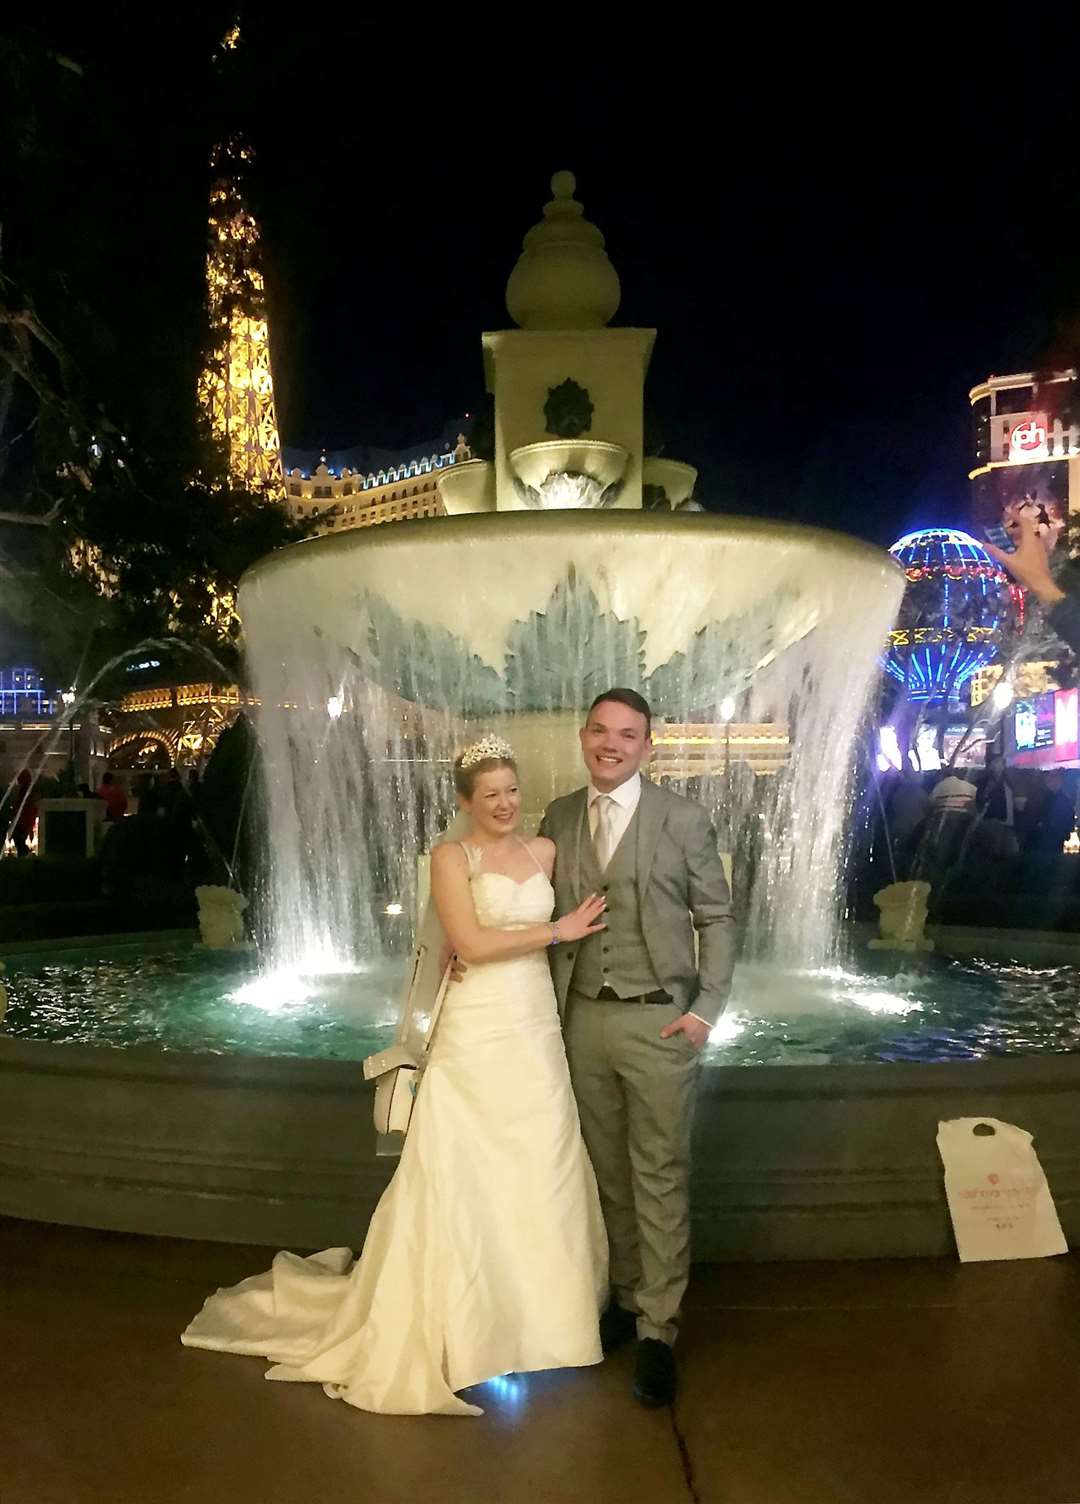 Sarah Elliott, 34, and Paul Edwards, 36, who met on a dating app on December 15 and immediately married in Vegas are now looking to divorce. Picture: SWNS